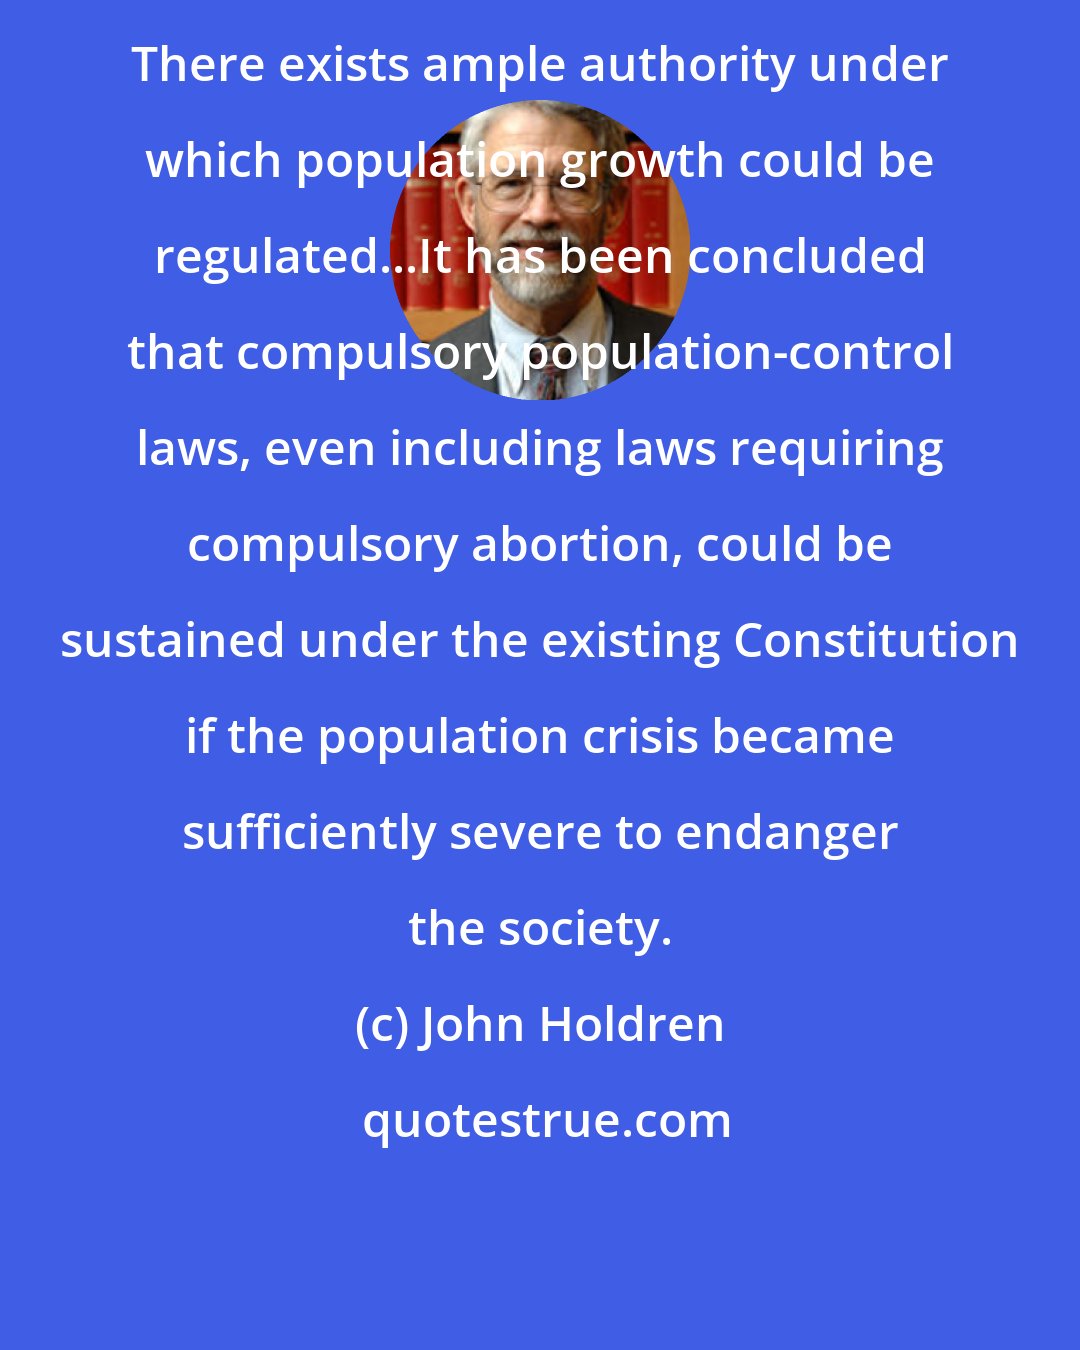 John Holdren: There exists ample authority under which population growth could be regulated...It has been concluded that compulsory population-control laws, even including laws requiring compulsory abortion, could be sustained under the existing Constitution if the population crisis became sufficiently severe to endanger the society.